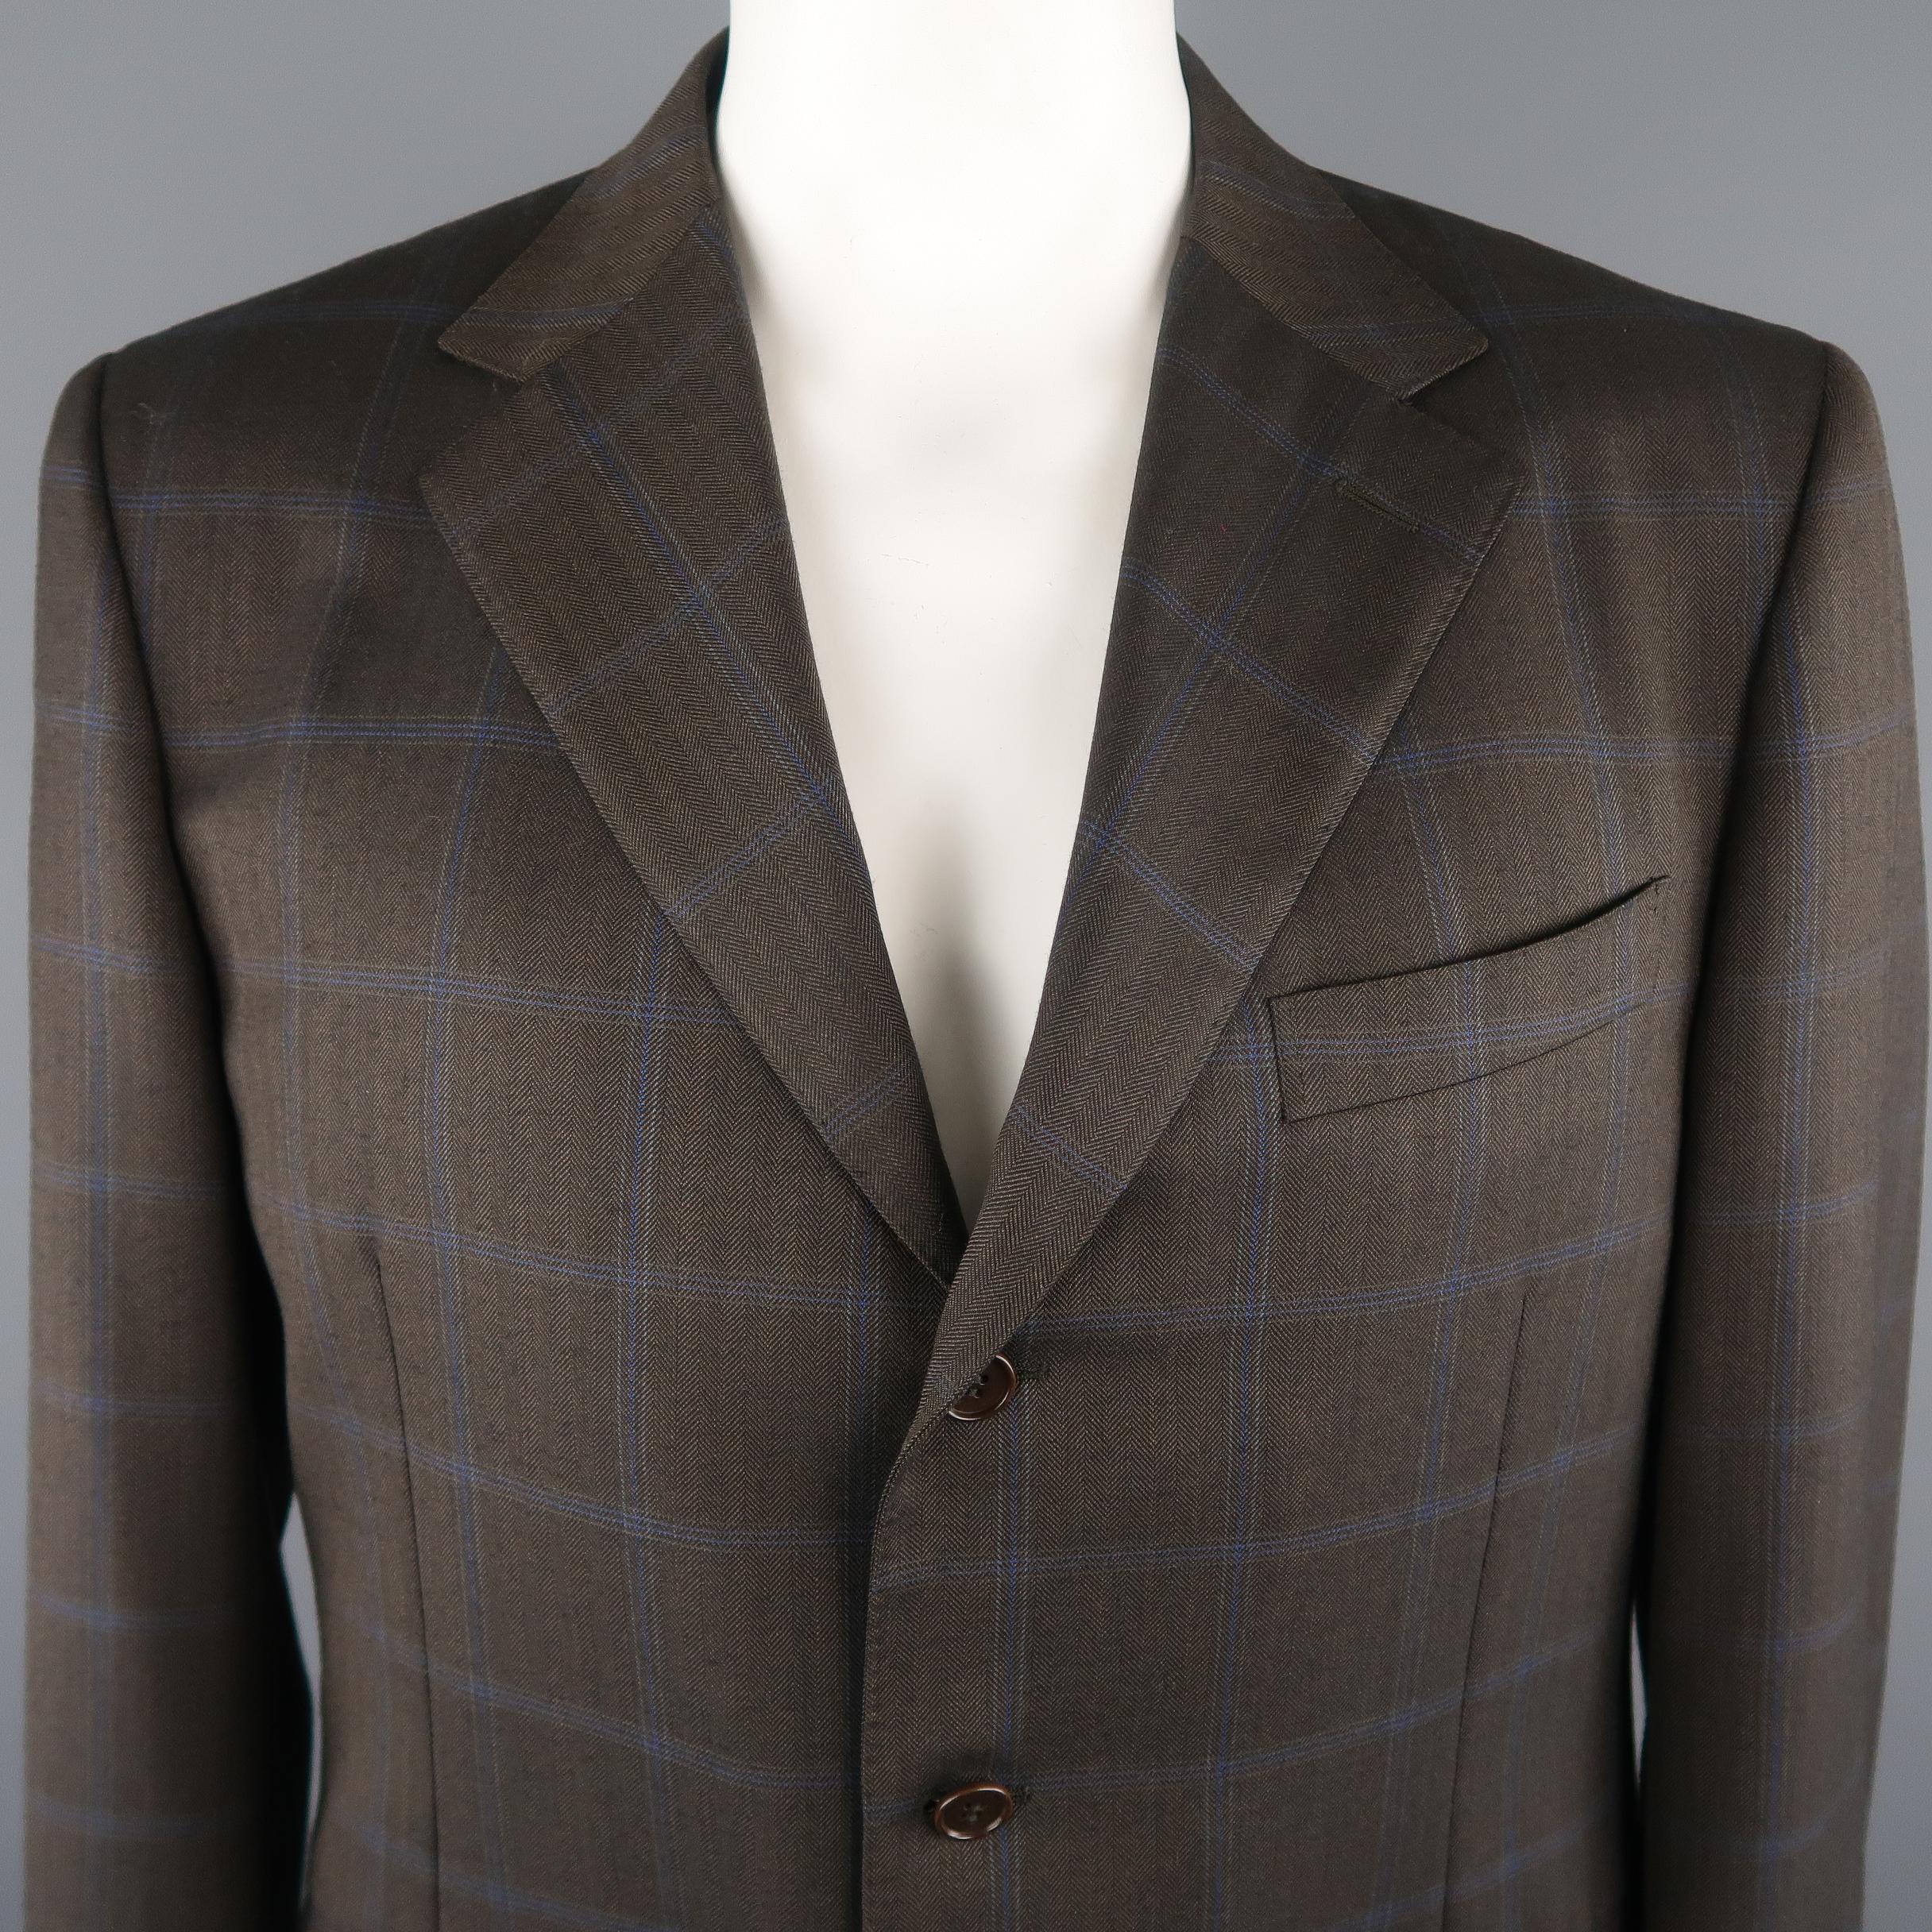 CANALI blazer comes in a brown tone in a window pane wool material, featuring a notch lapel, slit and flap pockets, 3 buttons closure, single breasted, functional buttons at cuffs and a regular fit. Made in Italy.
 
Excellent Pre-Owned